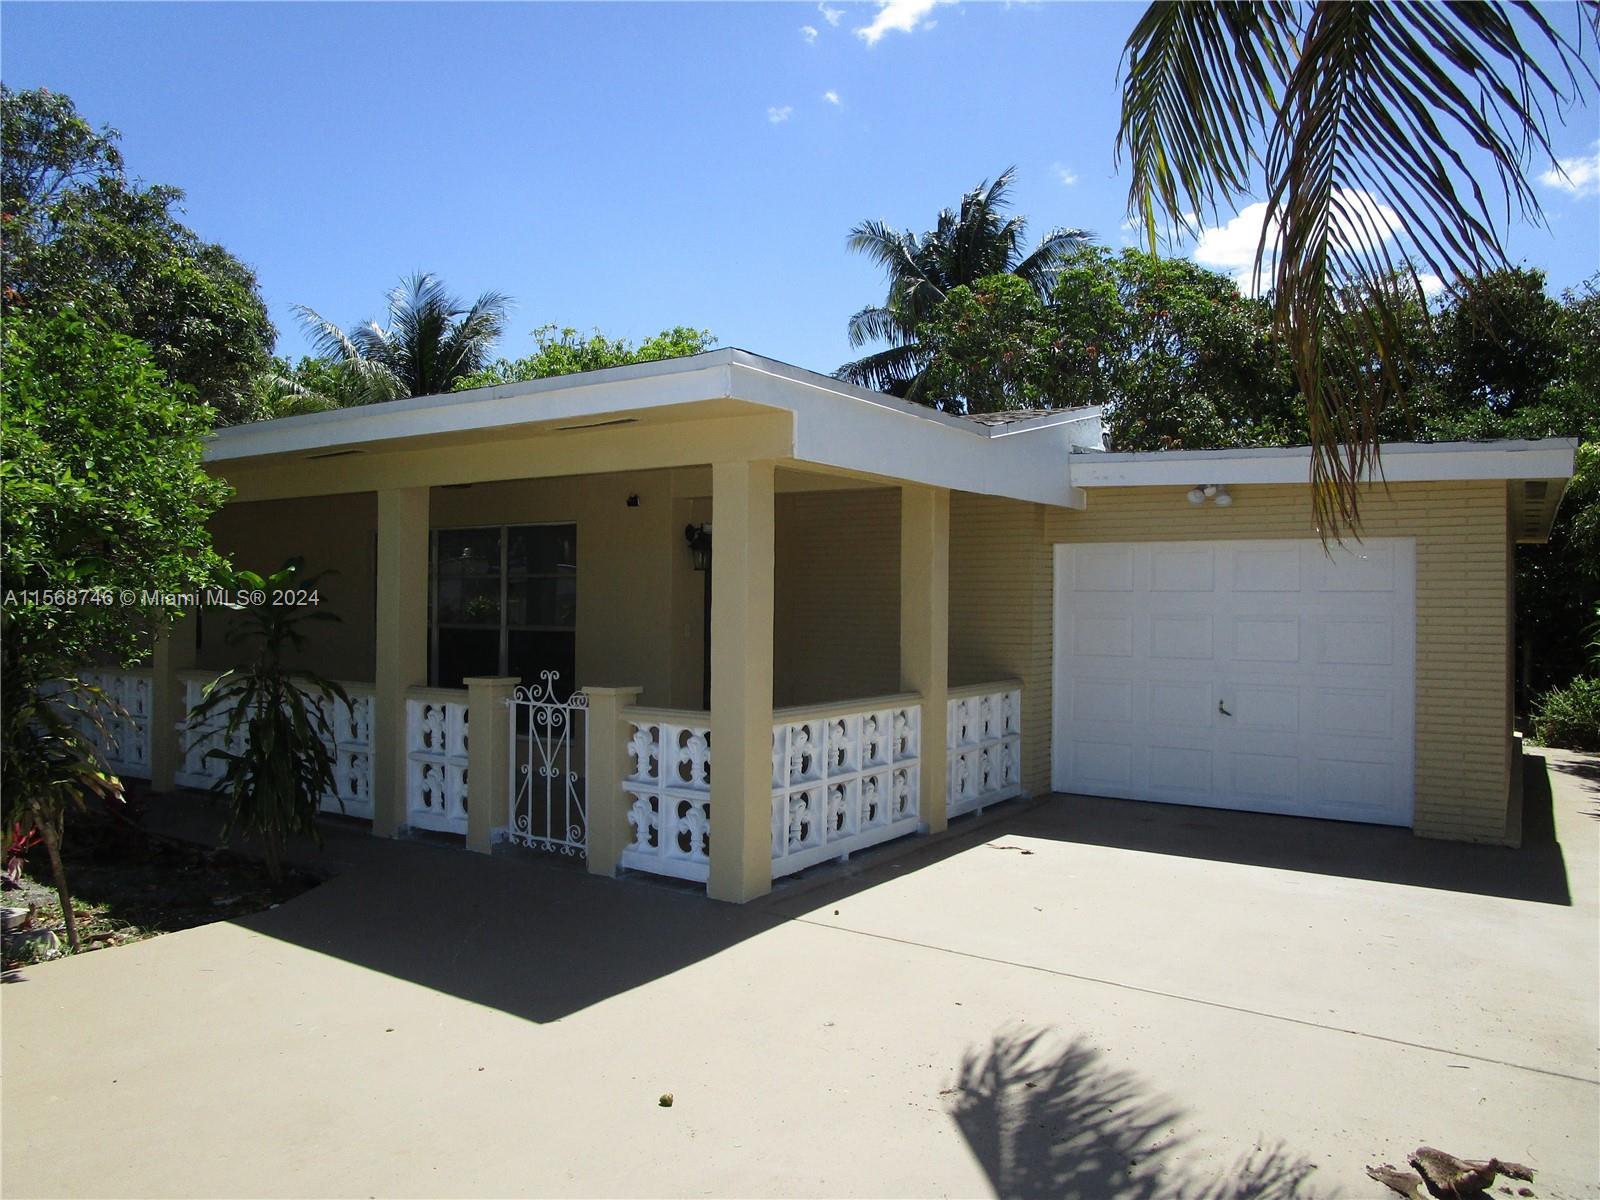 COMPLETELY REMODELED WITH PERMITS: NEW ROOF, NEW ELECTRICAL REWIRES, NEW TILE FLOORS, NEW BATHROOMS,